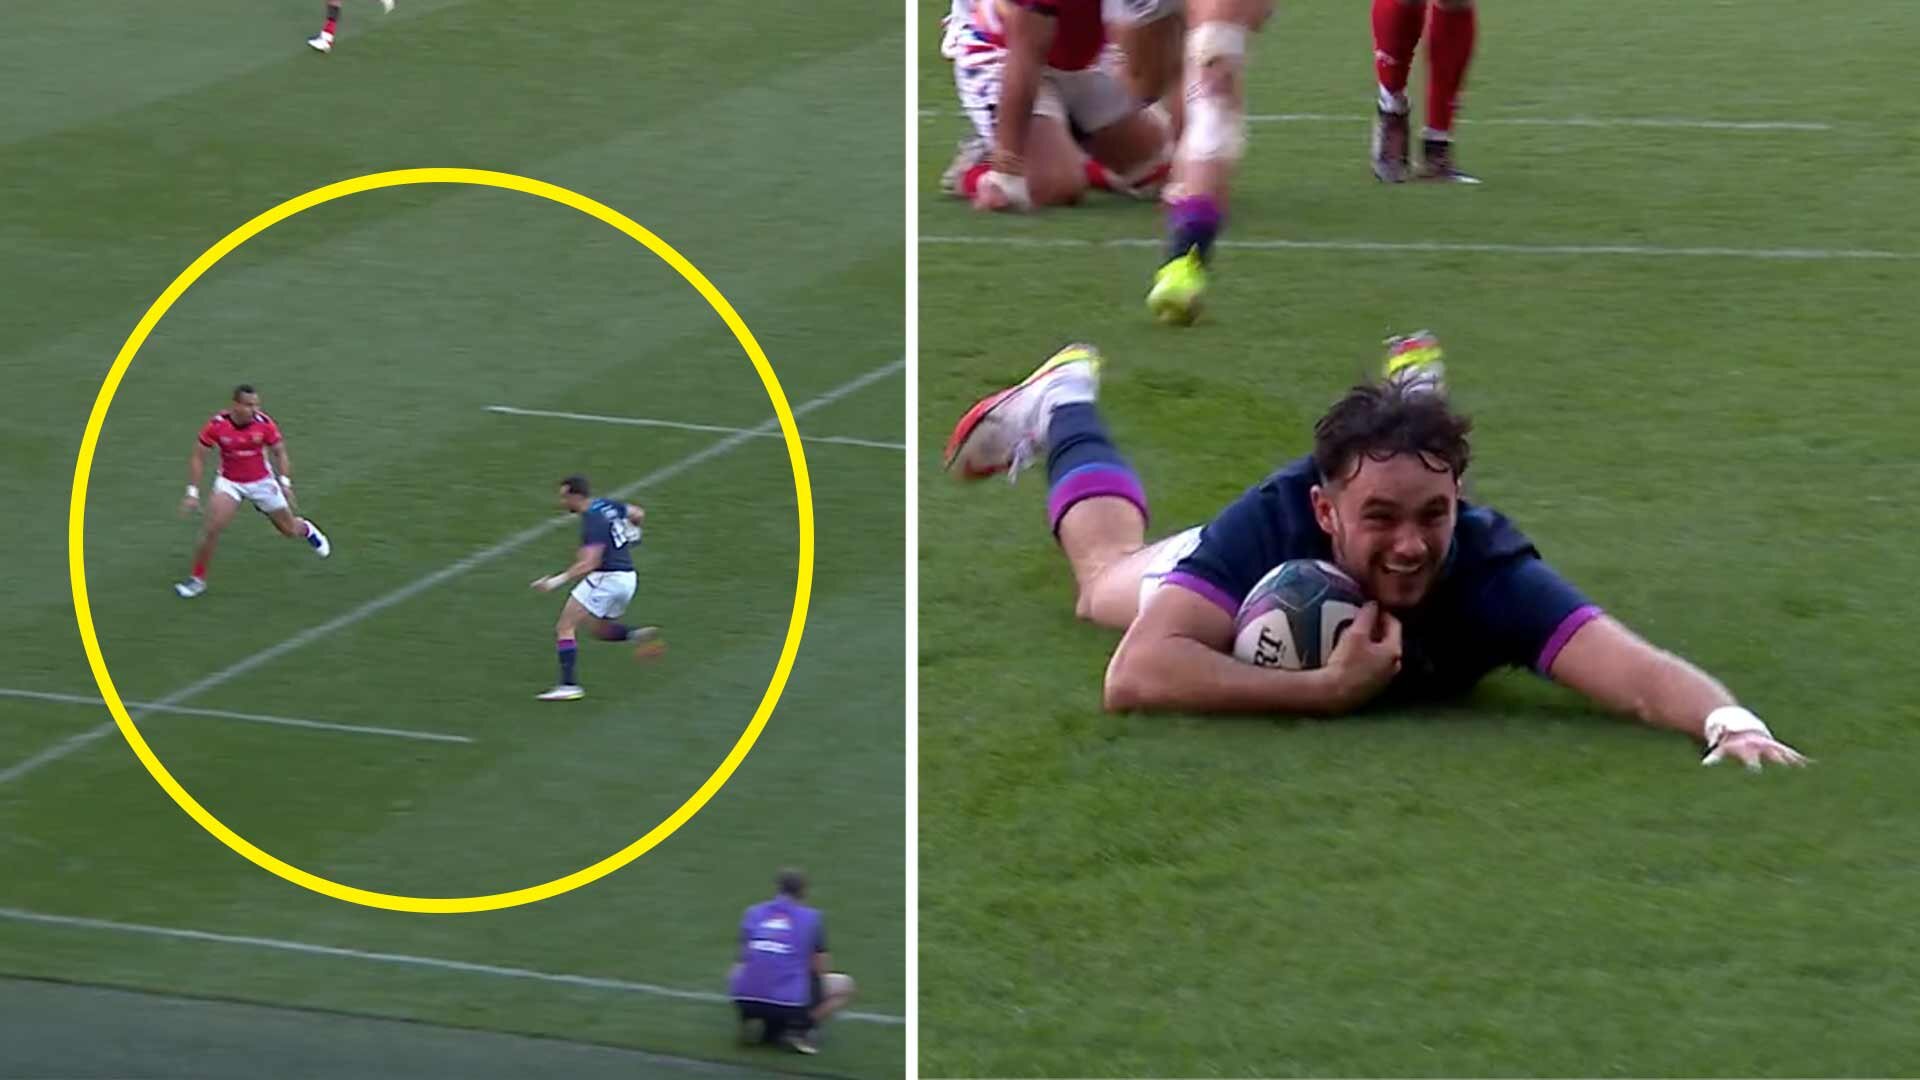 Rufus McLean sets rugby world on alert with ridiculous first half for Scotland